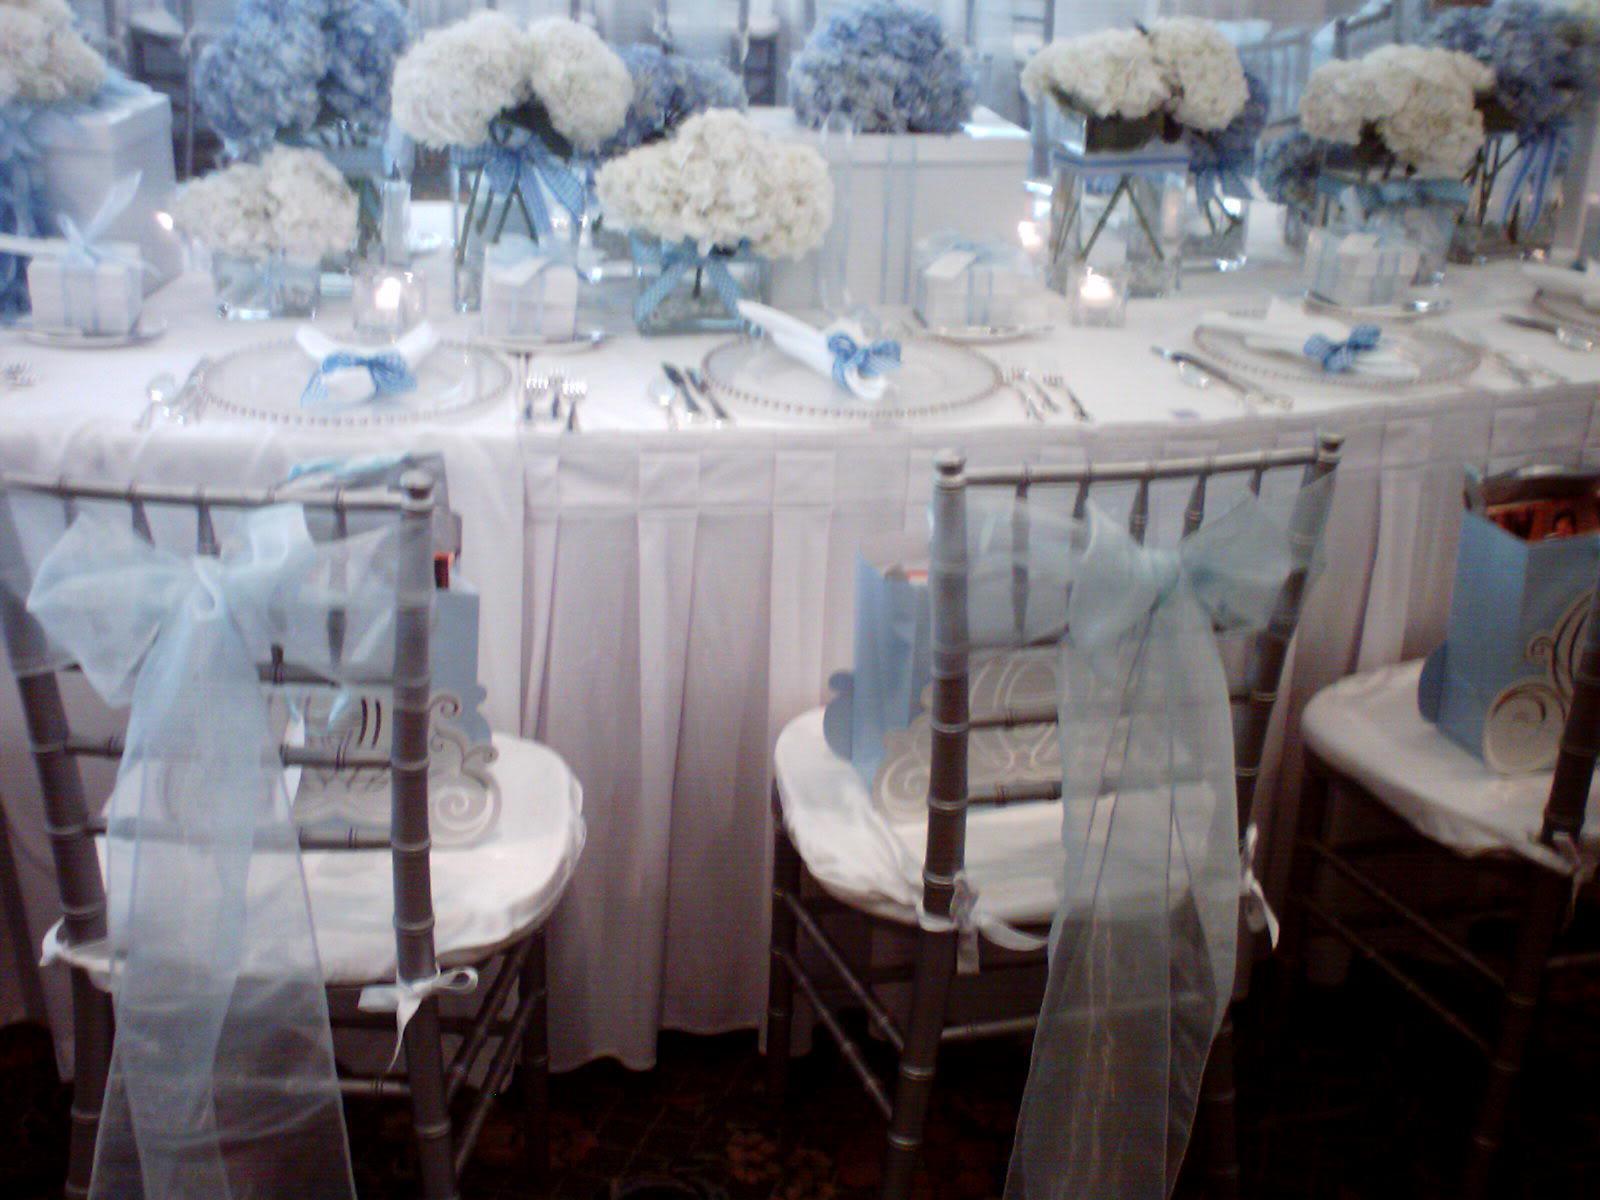 Diamante Wedding Shoes - Cheap sashes for chairs